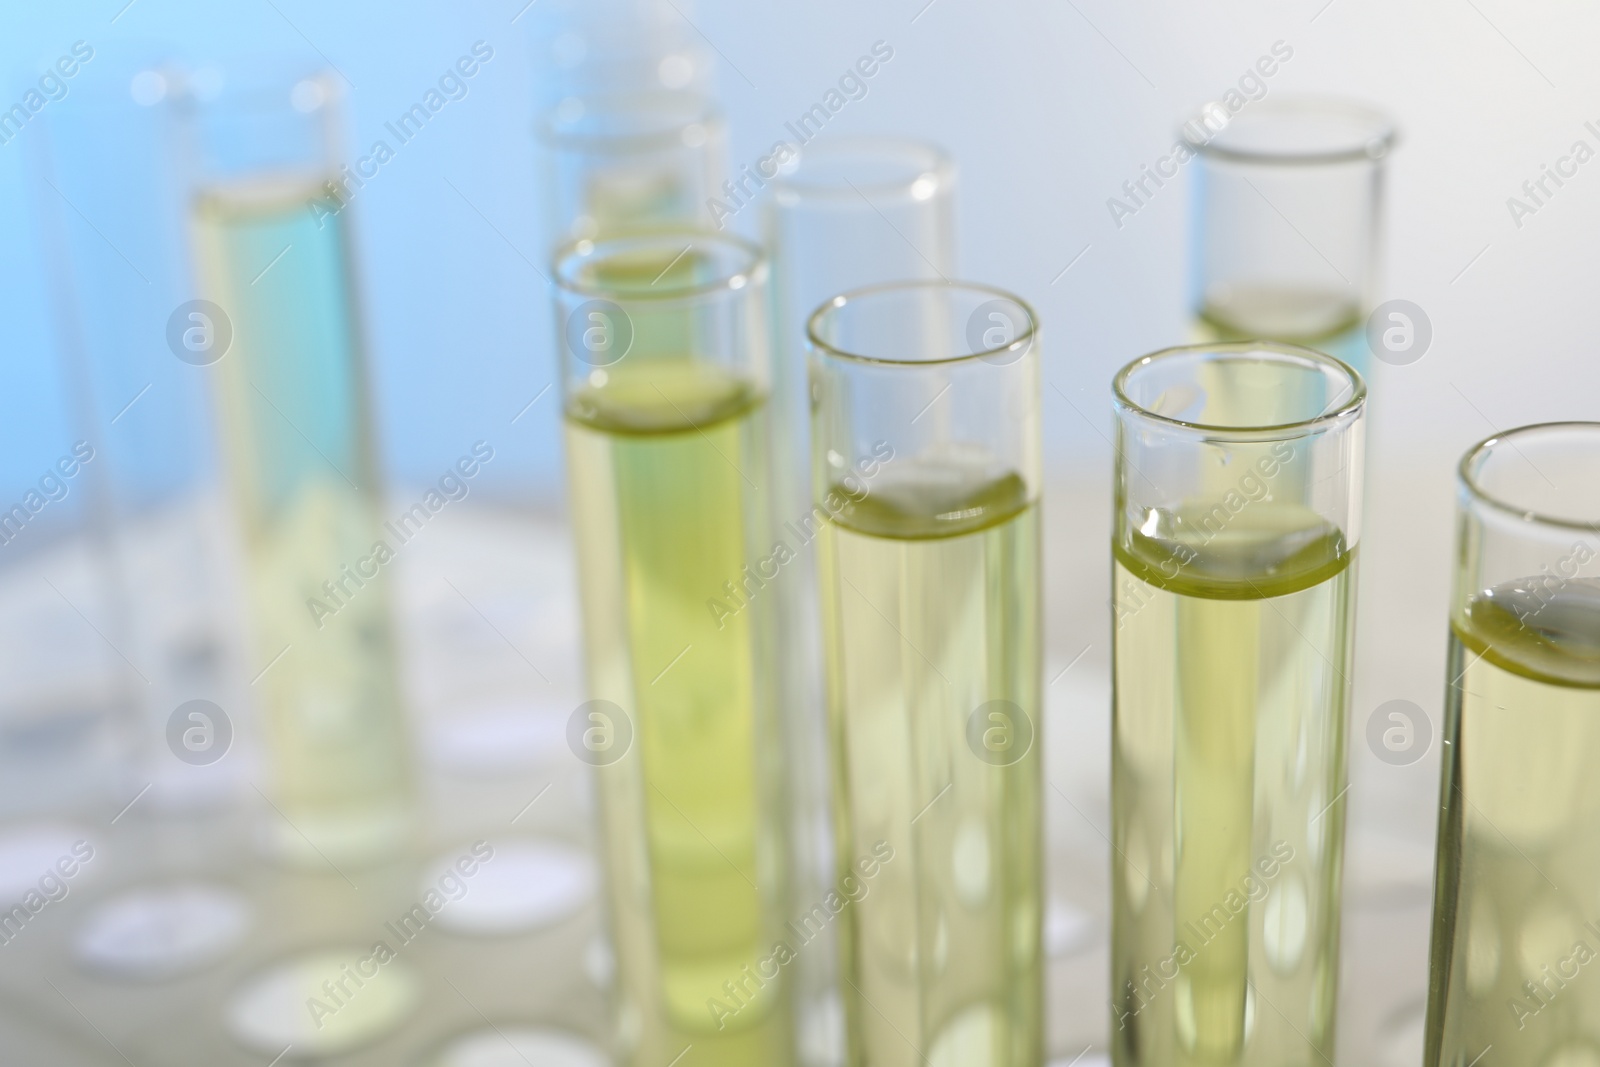 Photo of Test tubes with urine samples for analysis in holder on light blue background, closeup